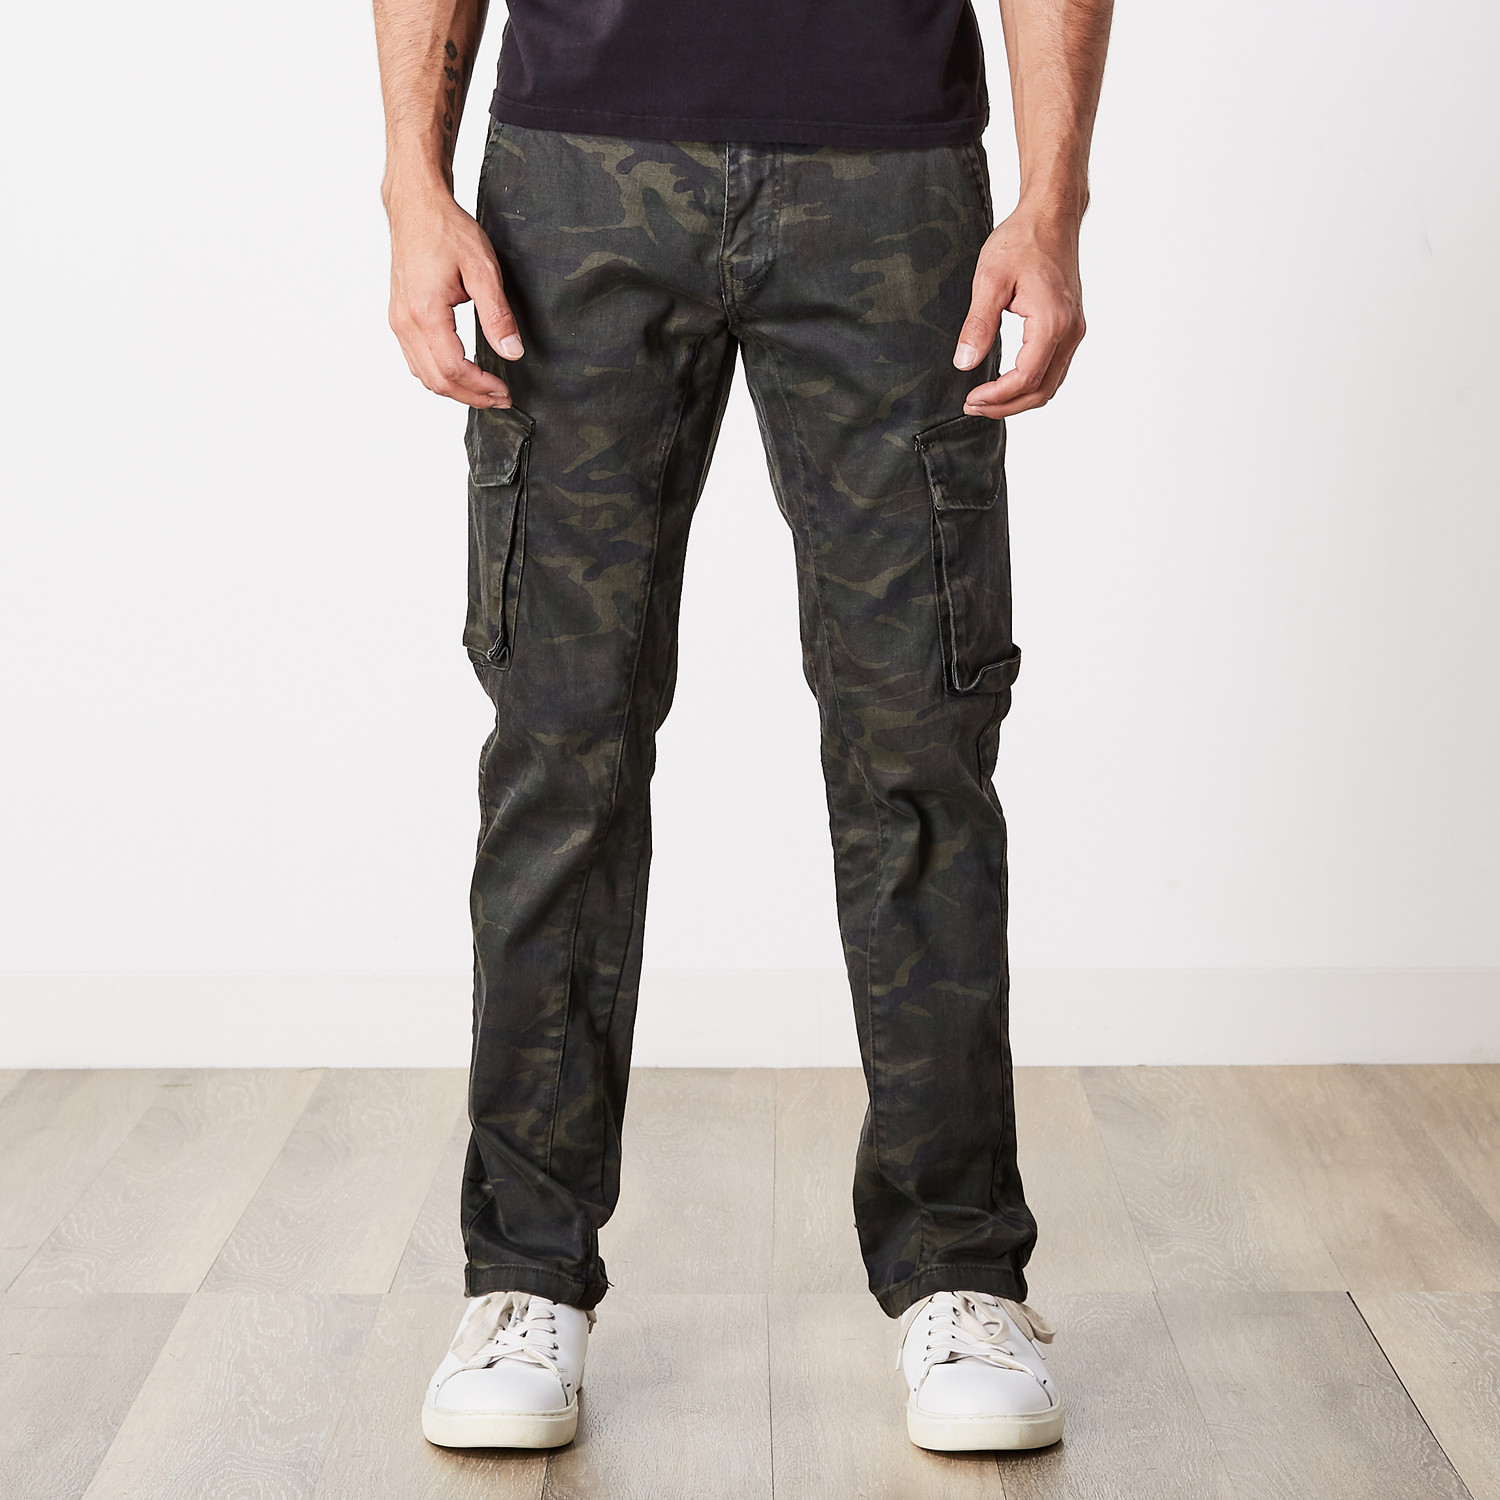 Slim Fit Cargo Pant // Olive Camo (30WX30L) - Xray Jeans - Touch of Modern